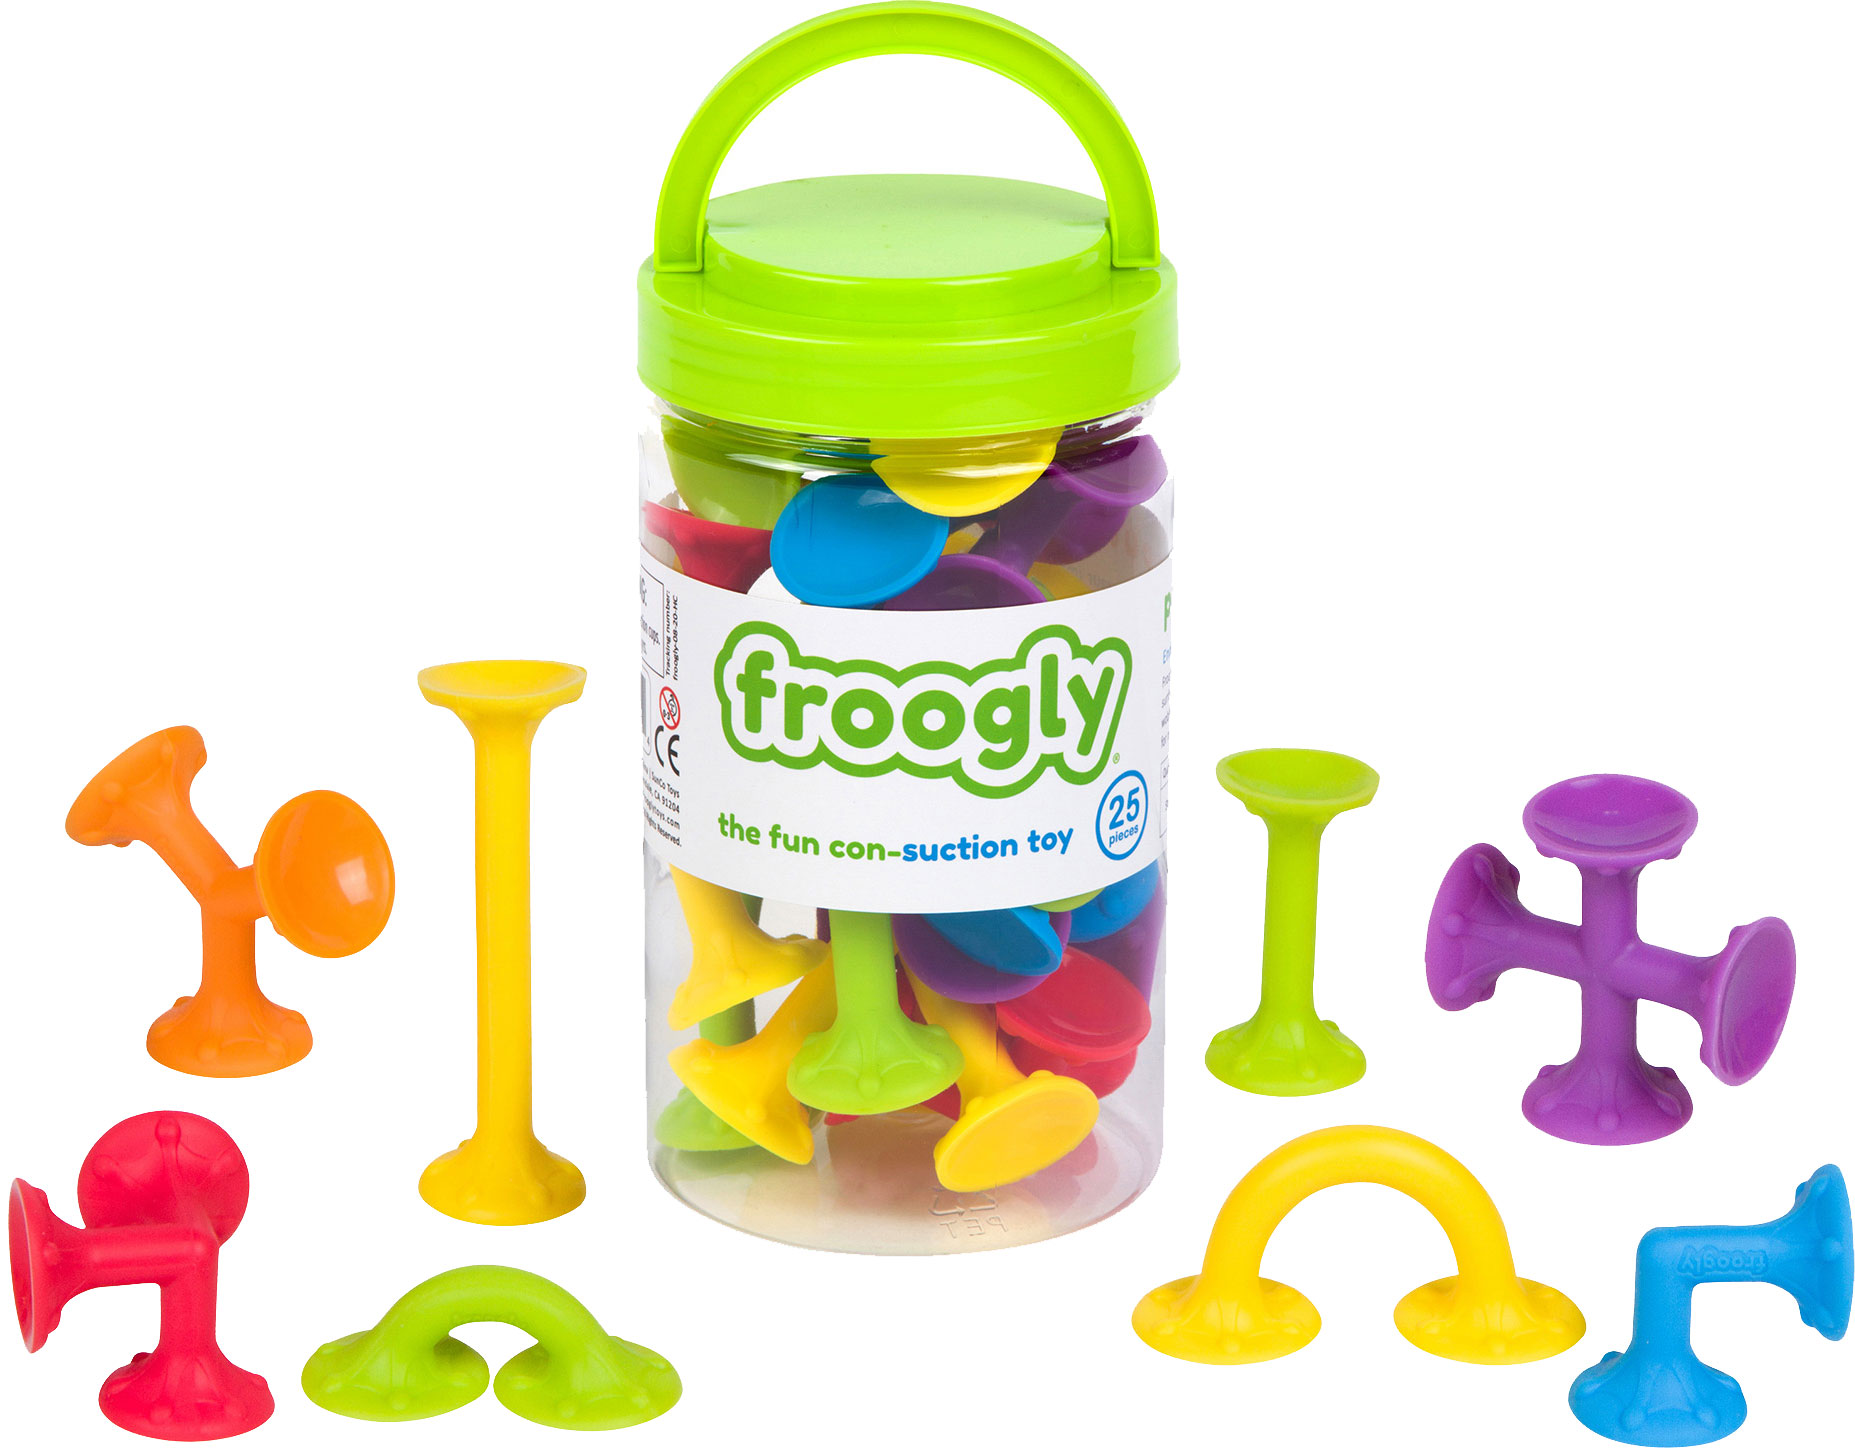 Froogly 25 pcs, innovative design providing stronger suction power